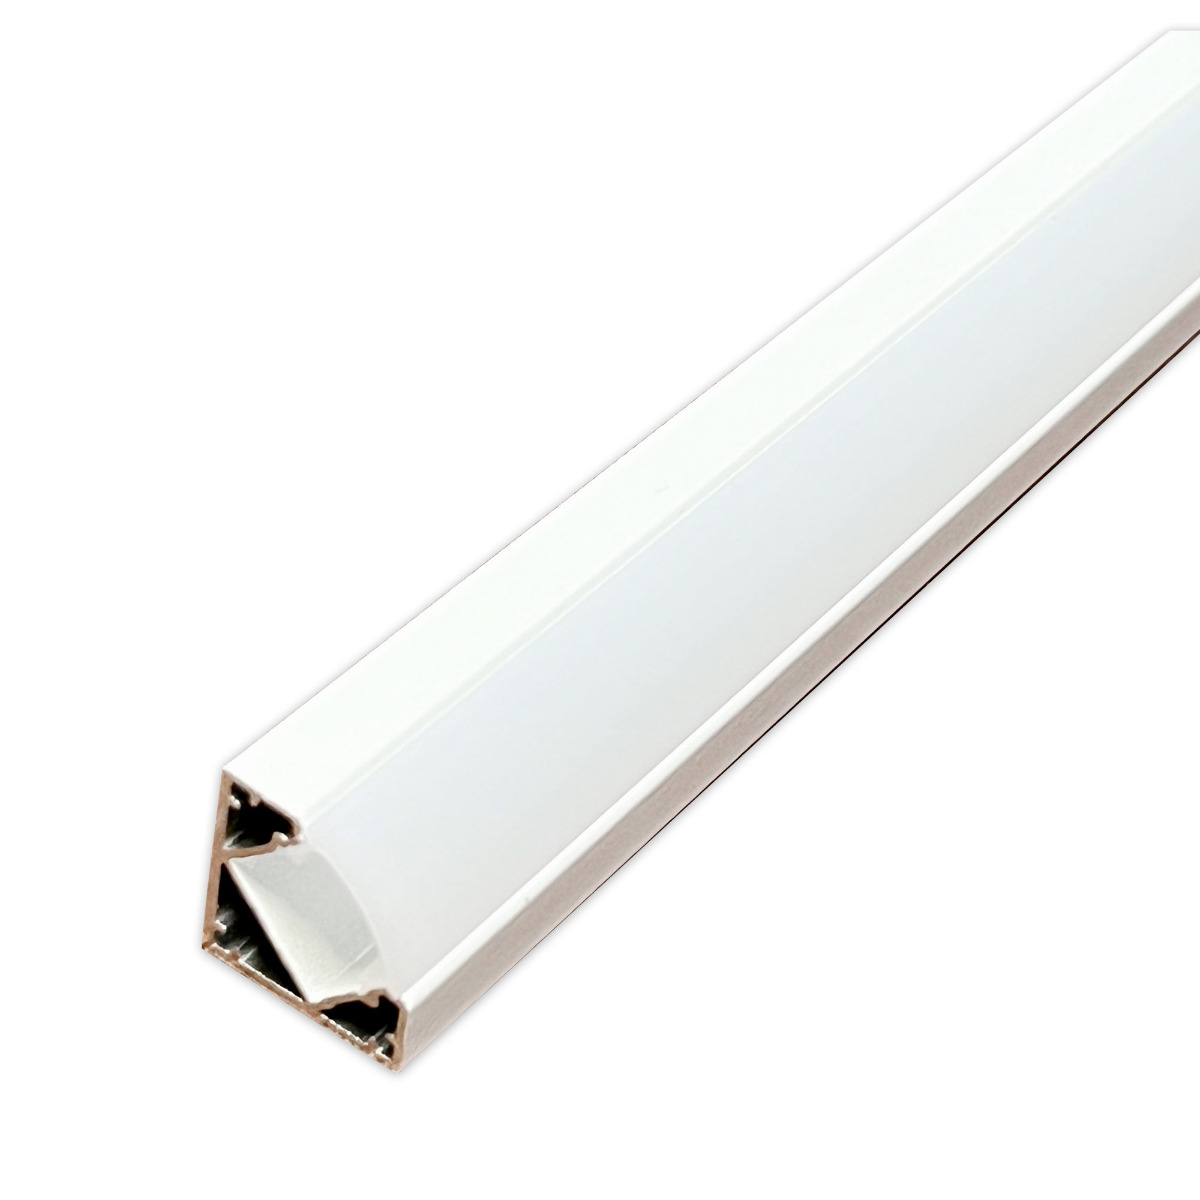 View 2m Long White Corner Aluminium Profile With Frosted Cover information